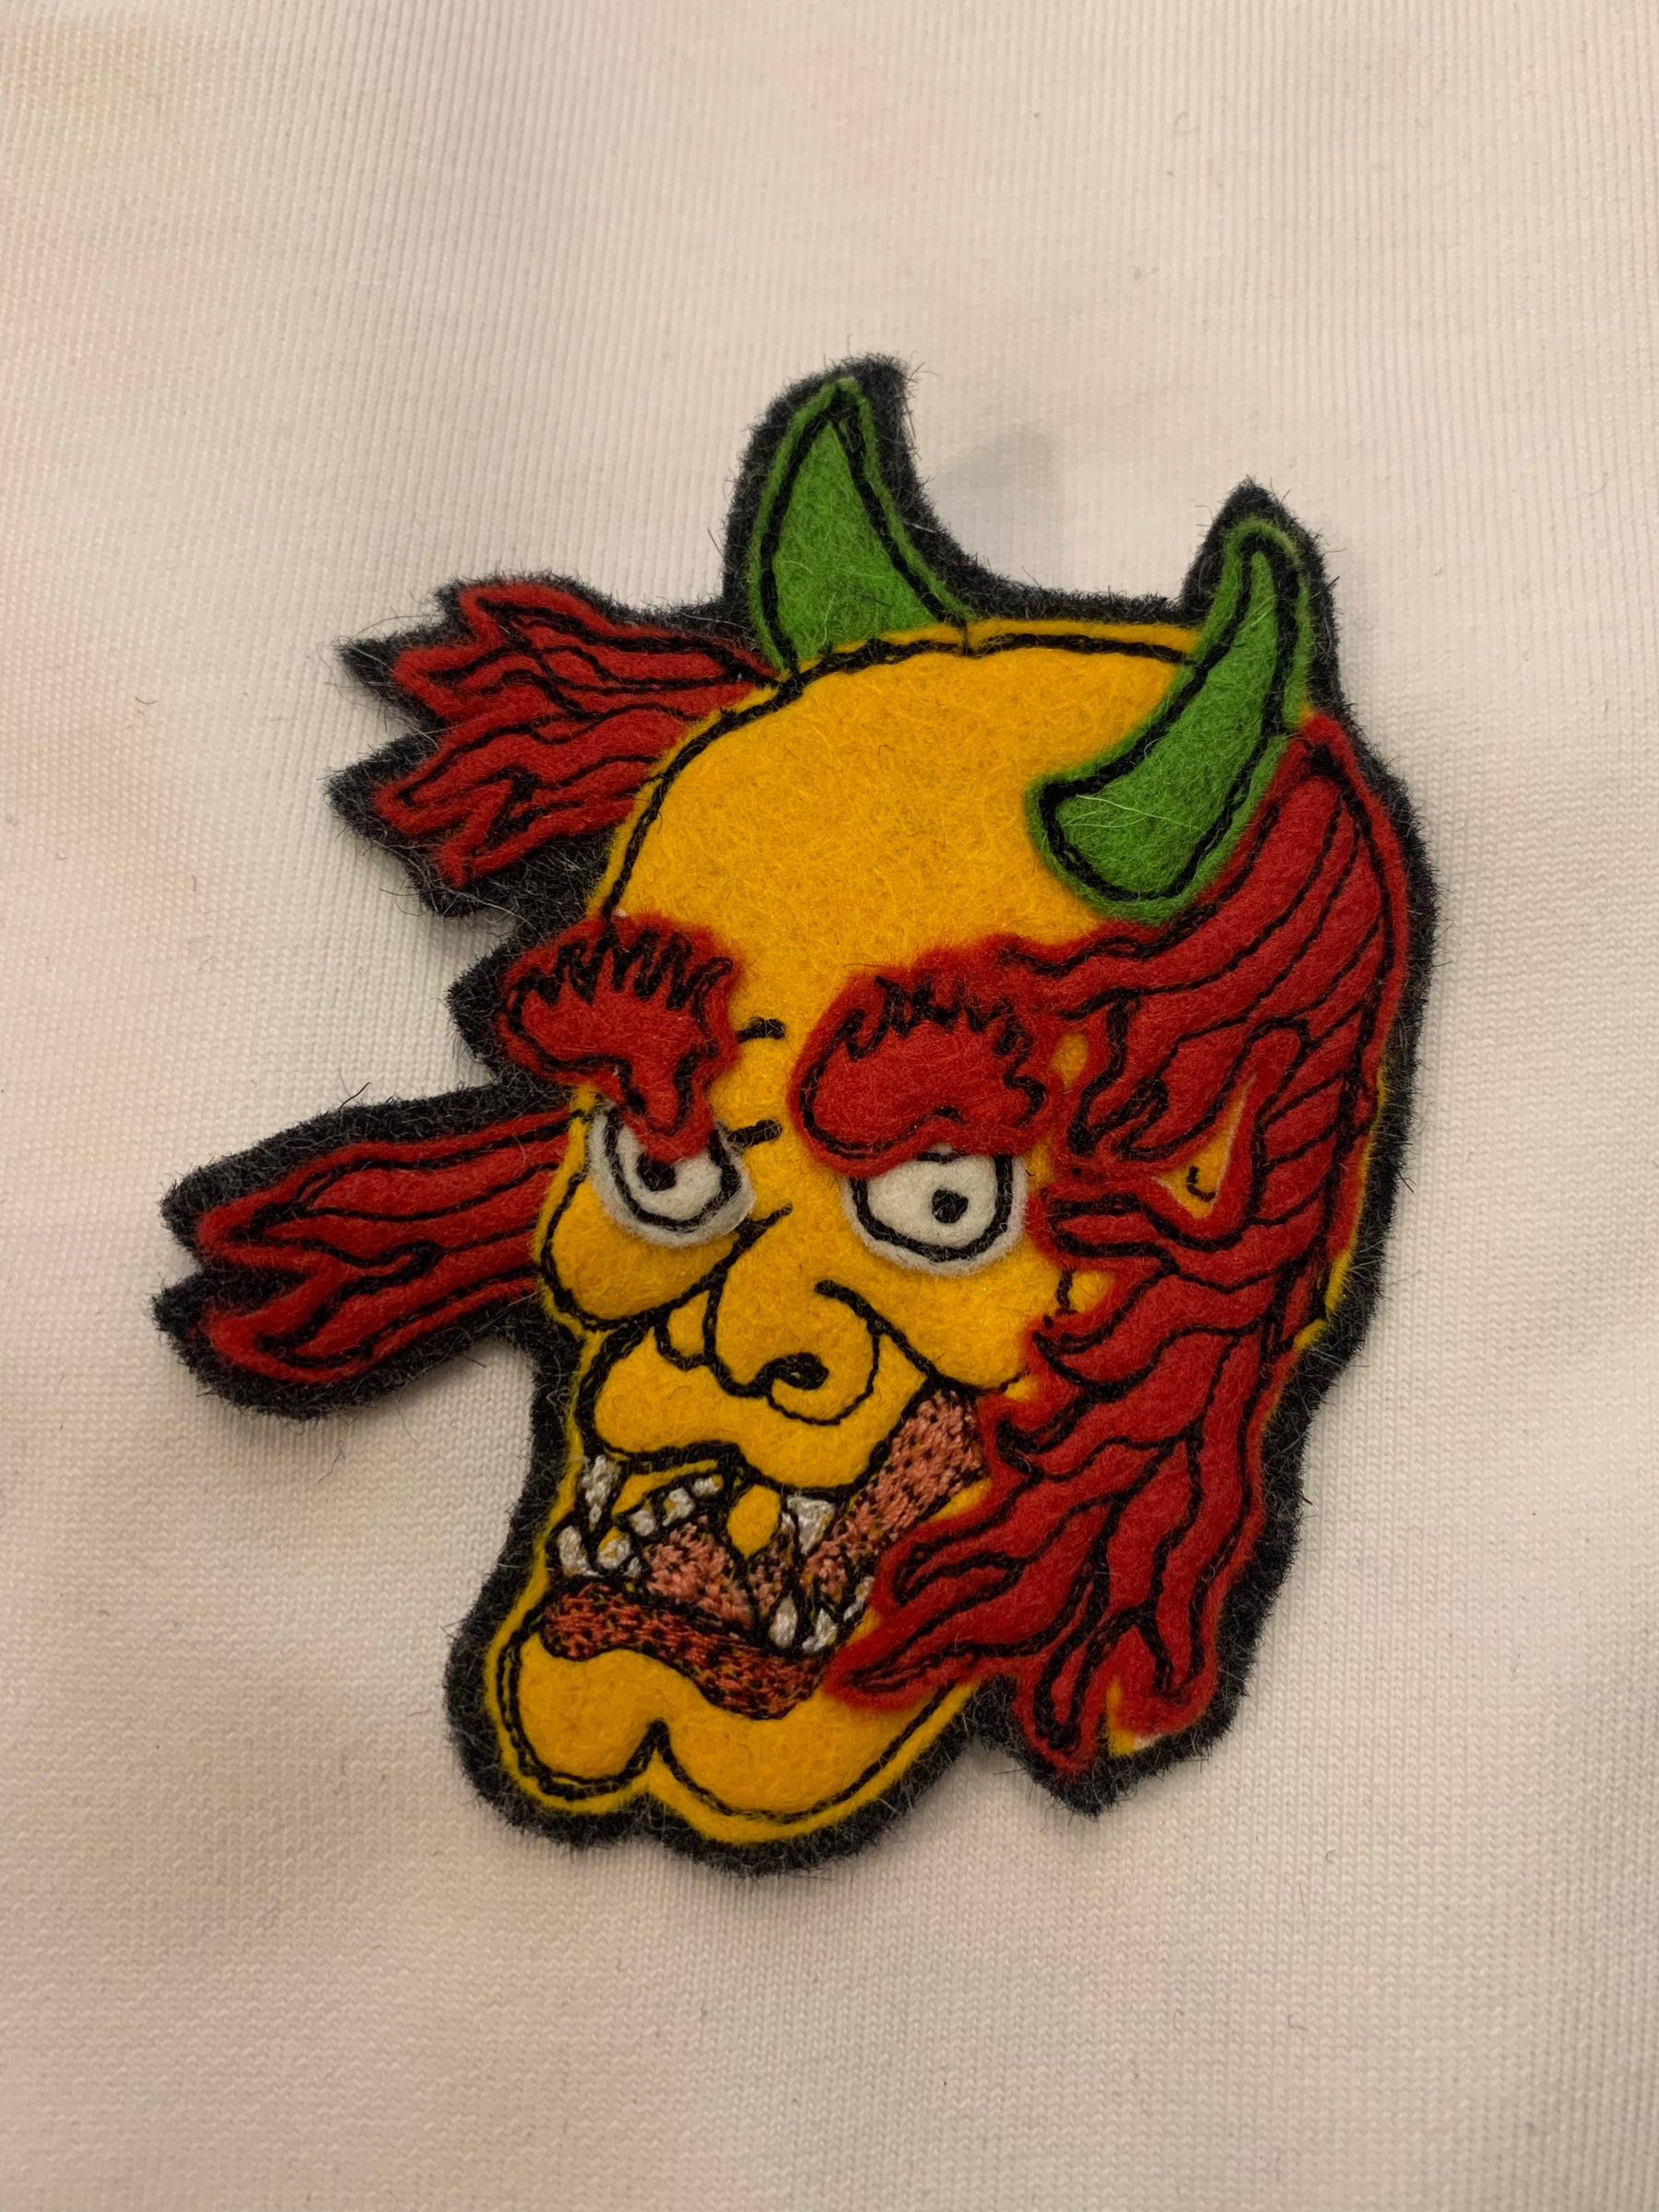 Japanese Demon God Face Hand Stitched Patch (Working Title exclusive) , Patch, Art + Object, Working Title